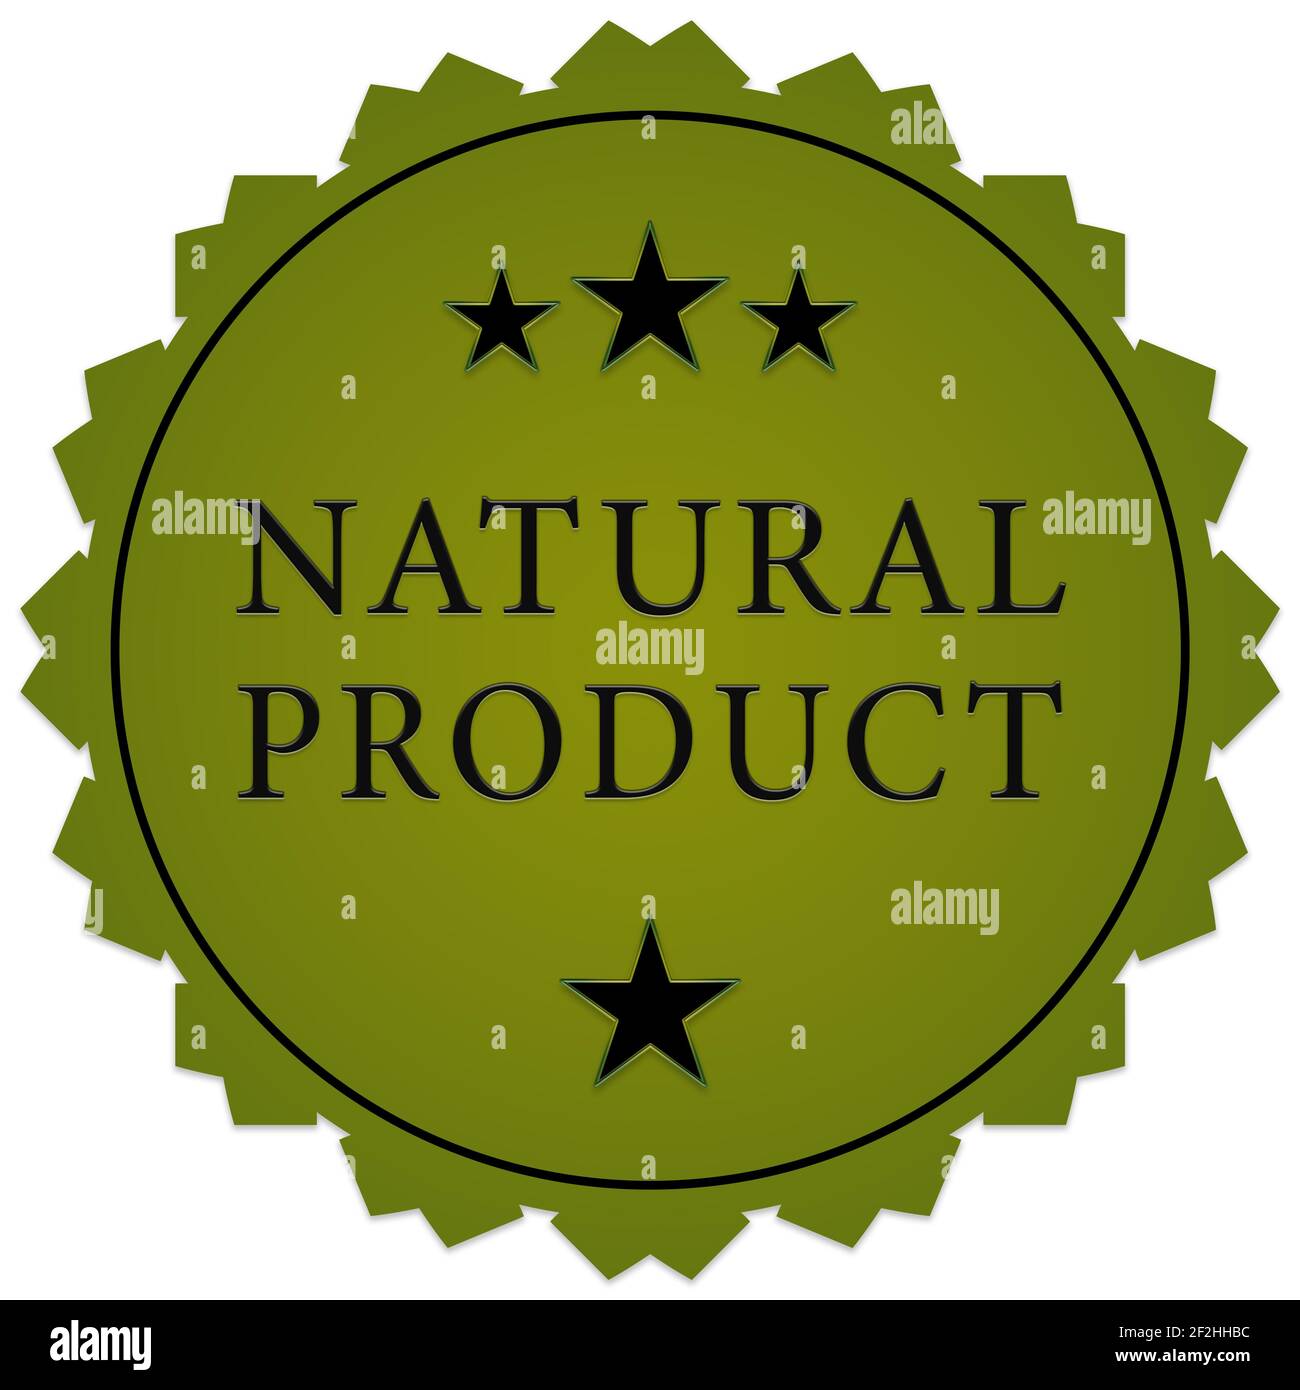 Natural product sticker. Green decorative star with black text on a white background Stock Photo